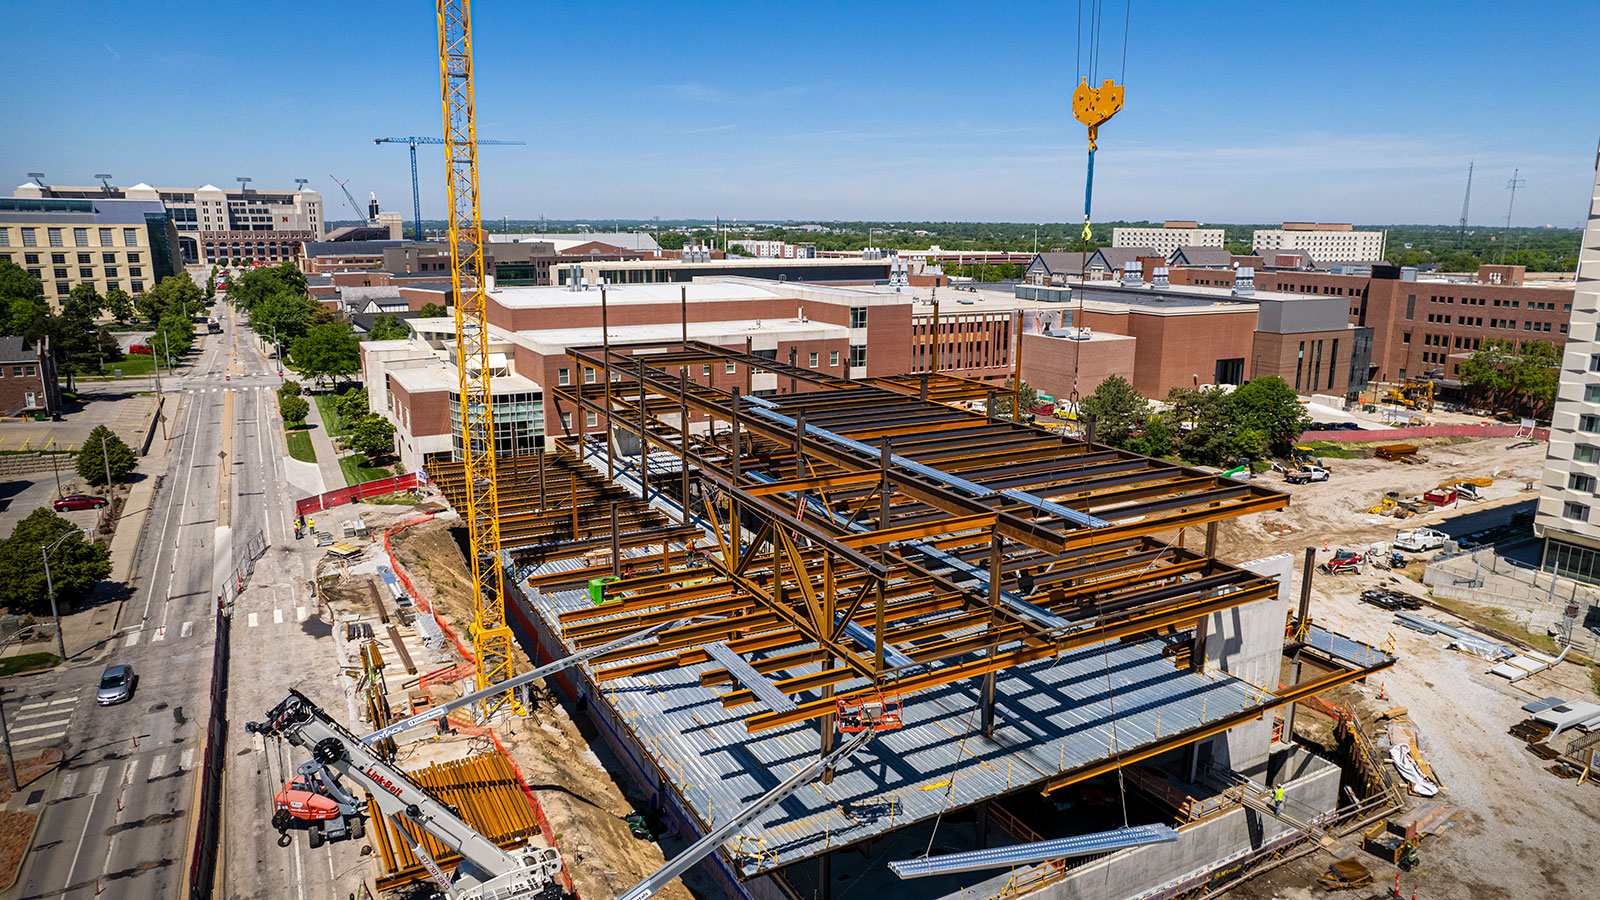 View of Kiewit Hall (under construction) from above, looking west down Vine Street with Memorial Stadium in the background.